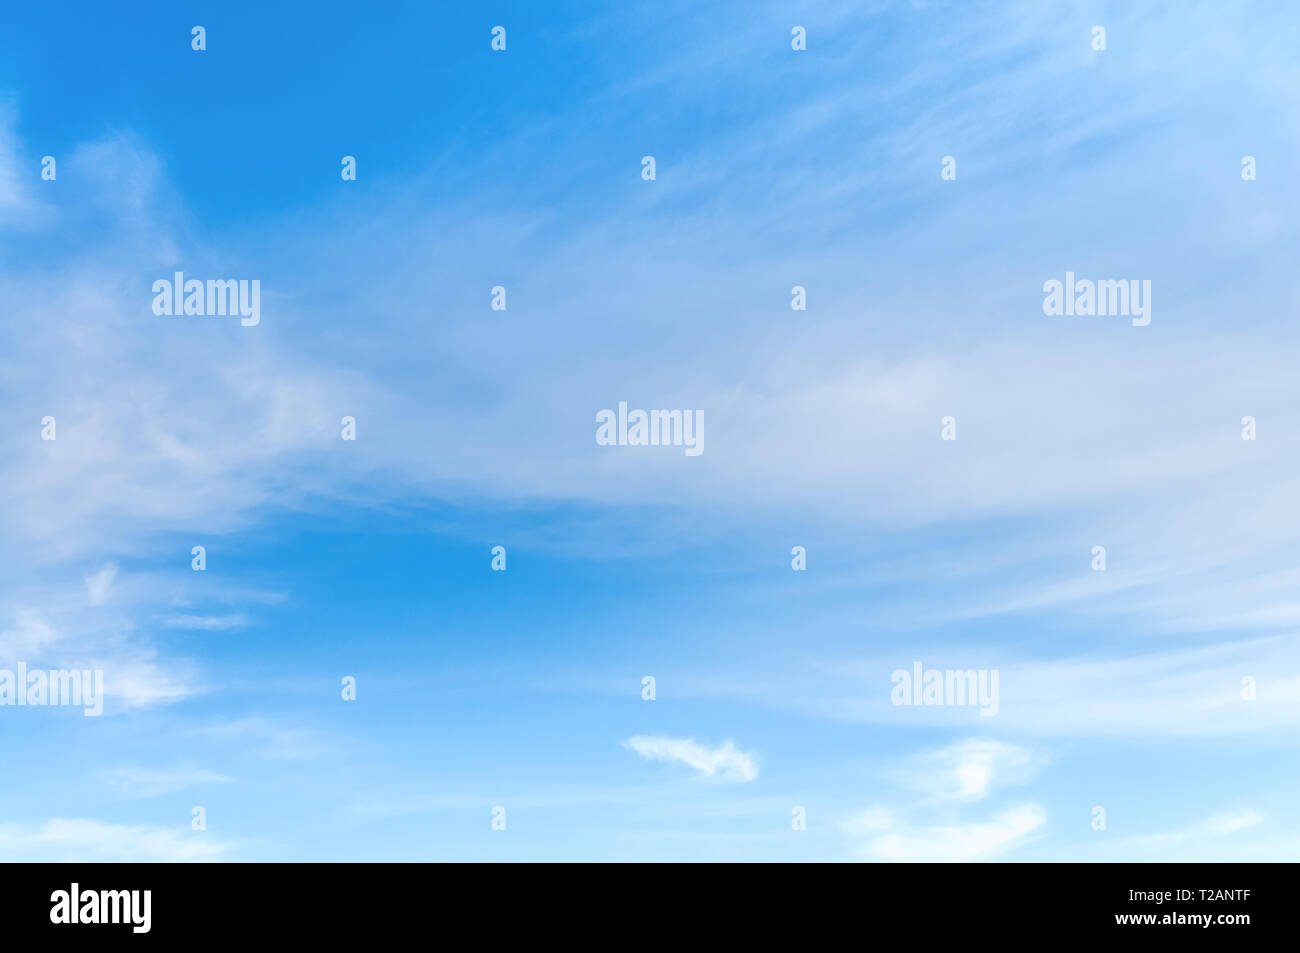 Freedom concept background of blue sky with white, soft clouds Stock Photo